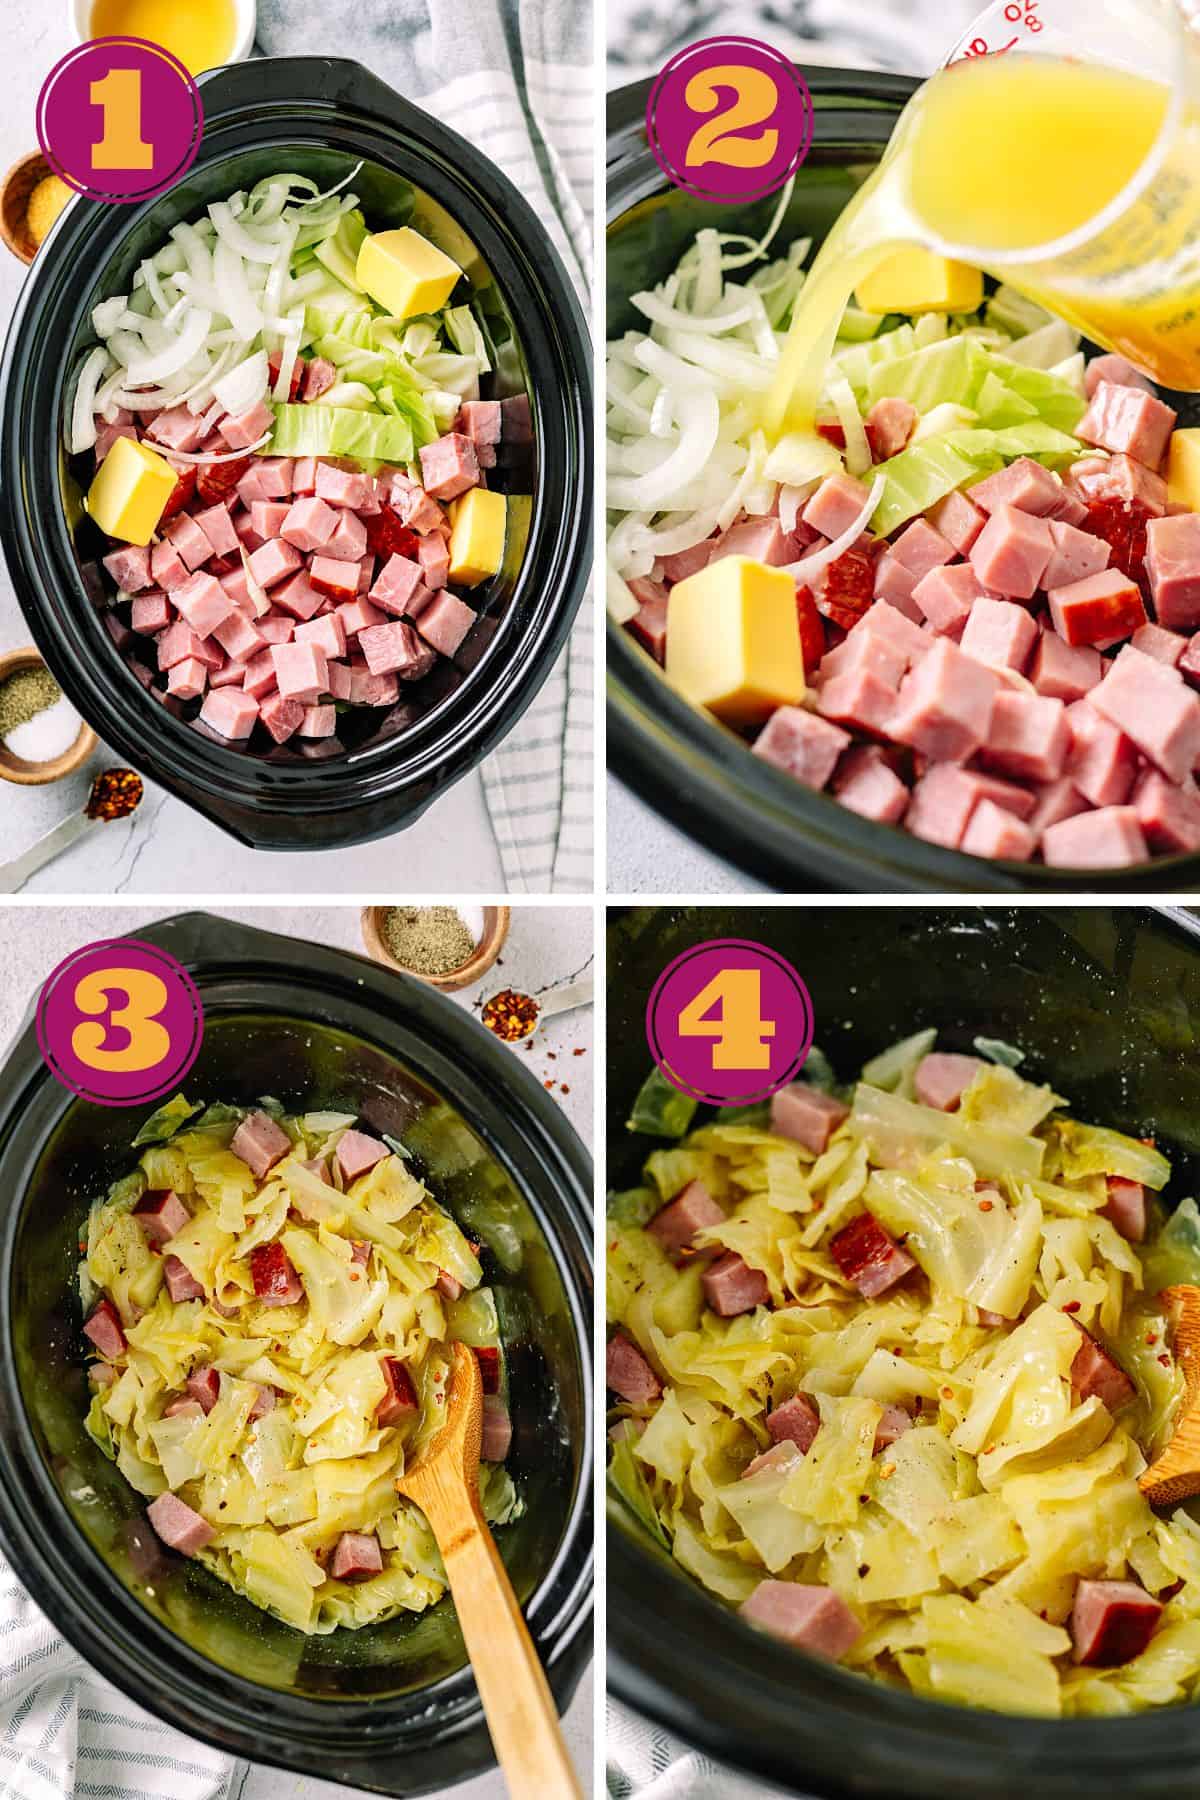 Steps To Cook Cabbage In A Crockpot 